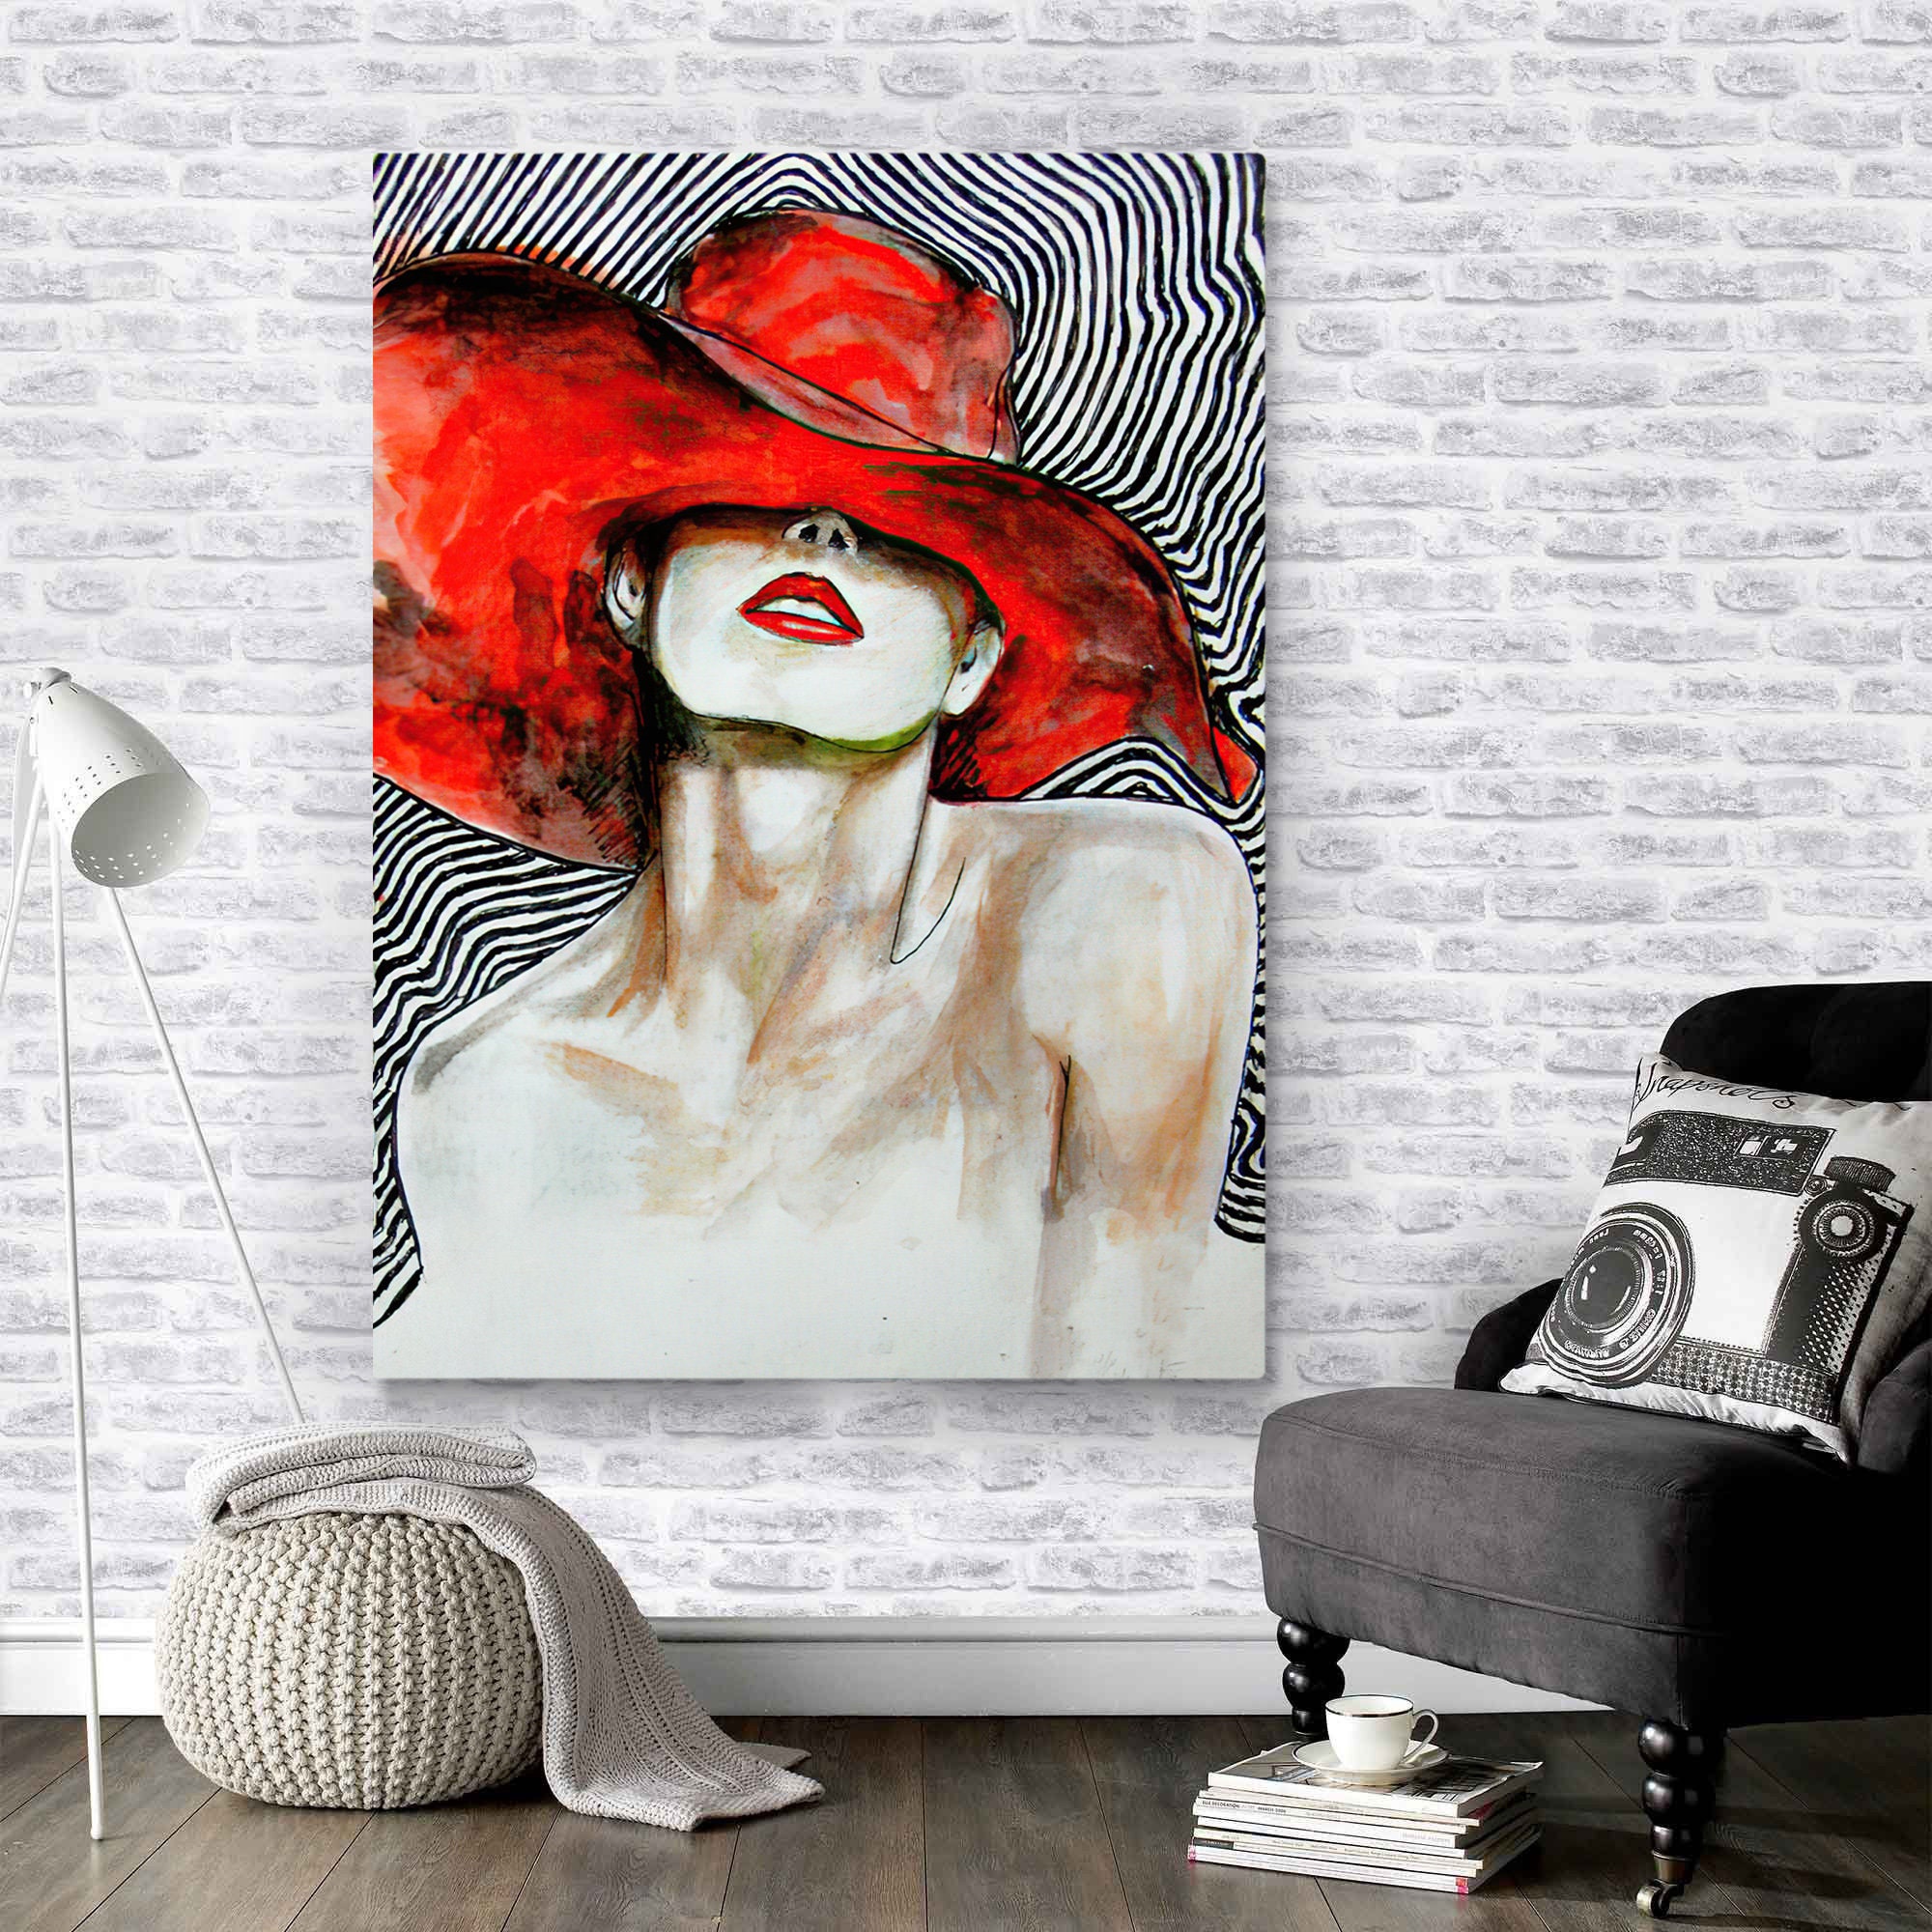 Art, the Woman Painting - Red Woman Art, Ladies Poster, Art, Art Wall Etsy Black Israel Hat and Canvas, With Art, Girl Portrait Woman Female Woman Print,